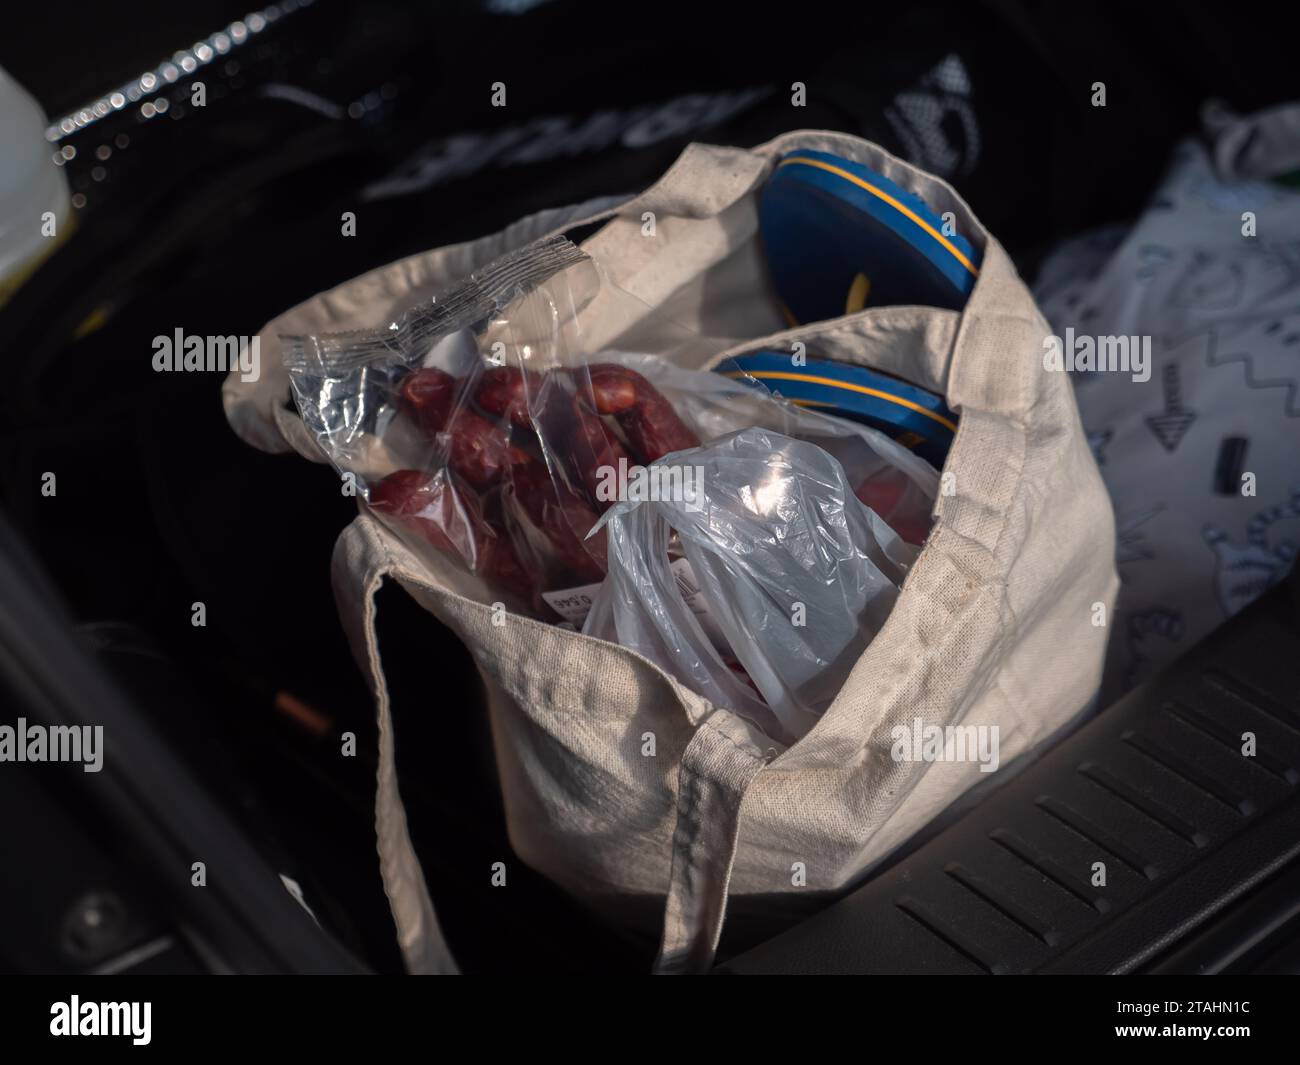 A bag with smoked sausages, snacks, and thong shoes to change in an open car trunk at a stopover. Travel road trip concept. Stock Photo